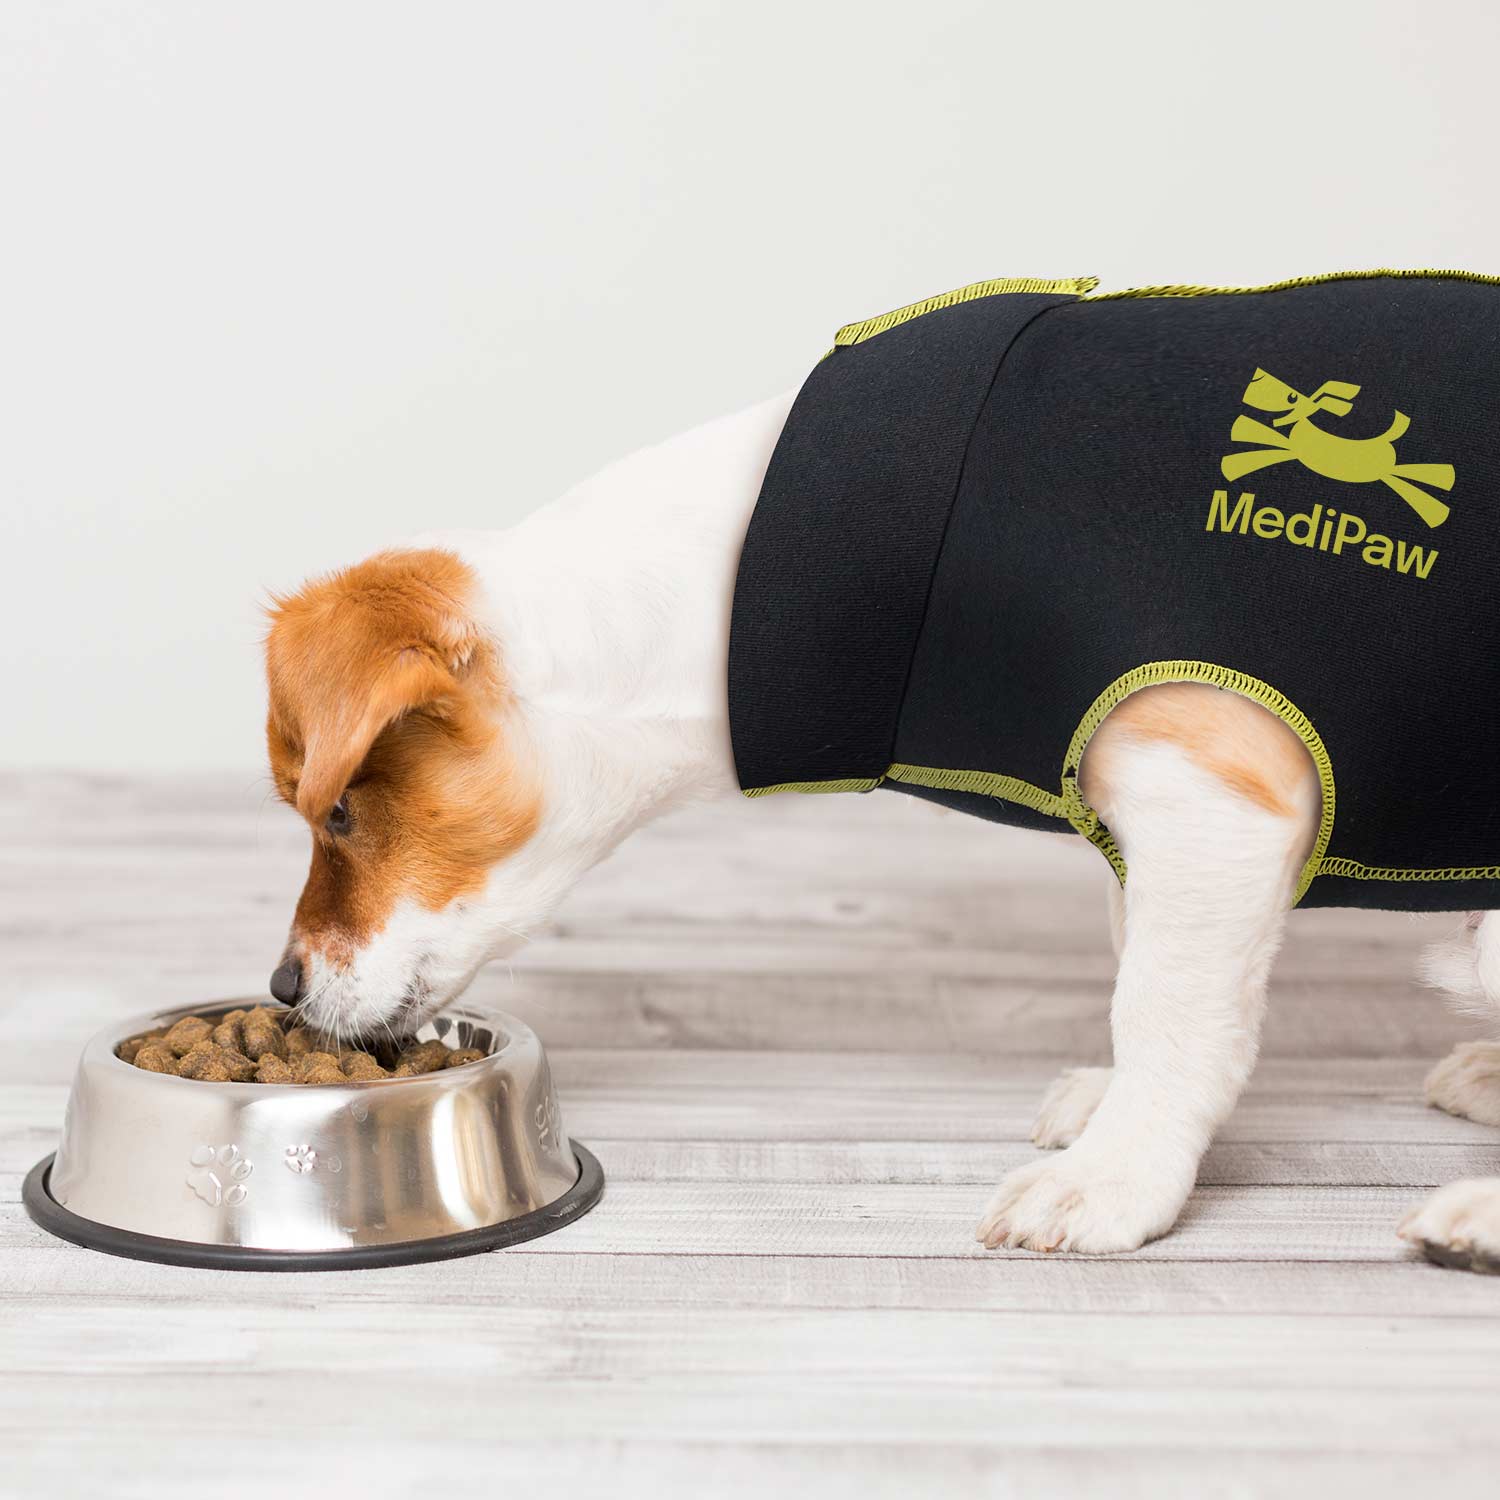 A dog in Australia is eating from a bowl of MediPaw: Protective/Surgical Dog Suit food by Your Whole Dog.